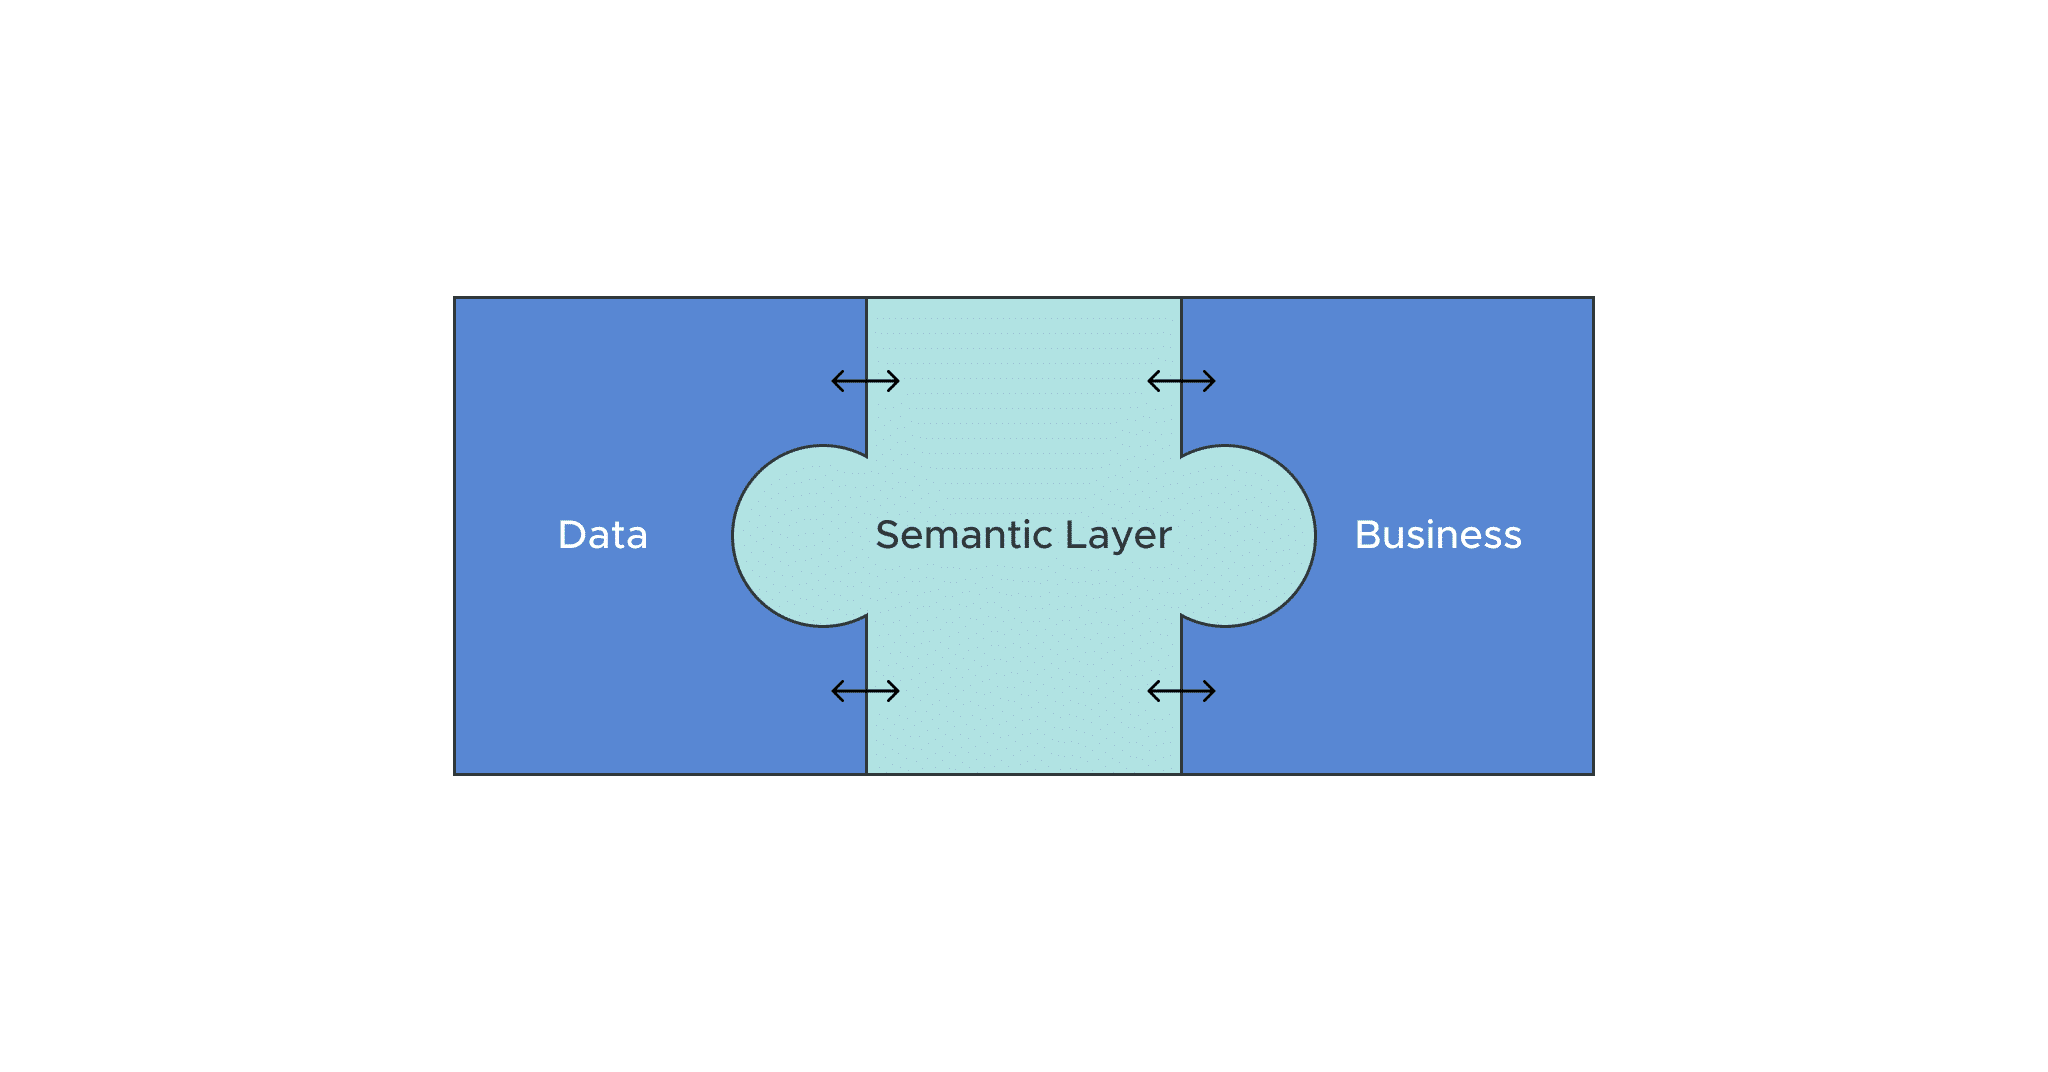 Why Semantic Layers? The very human purpose of a key technical architecture